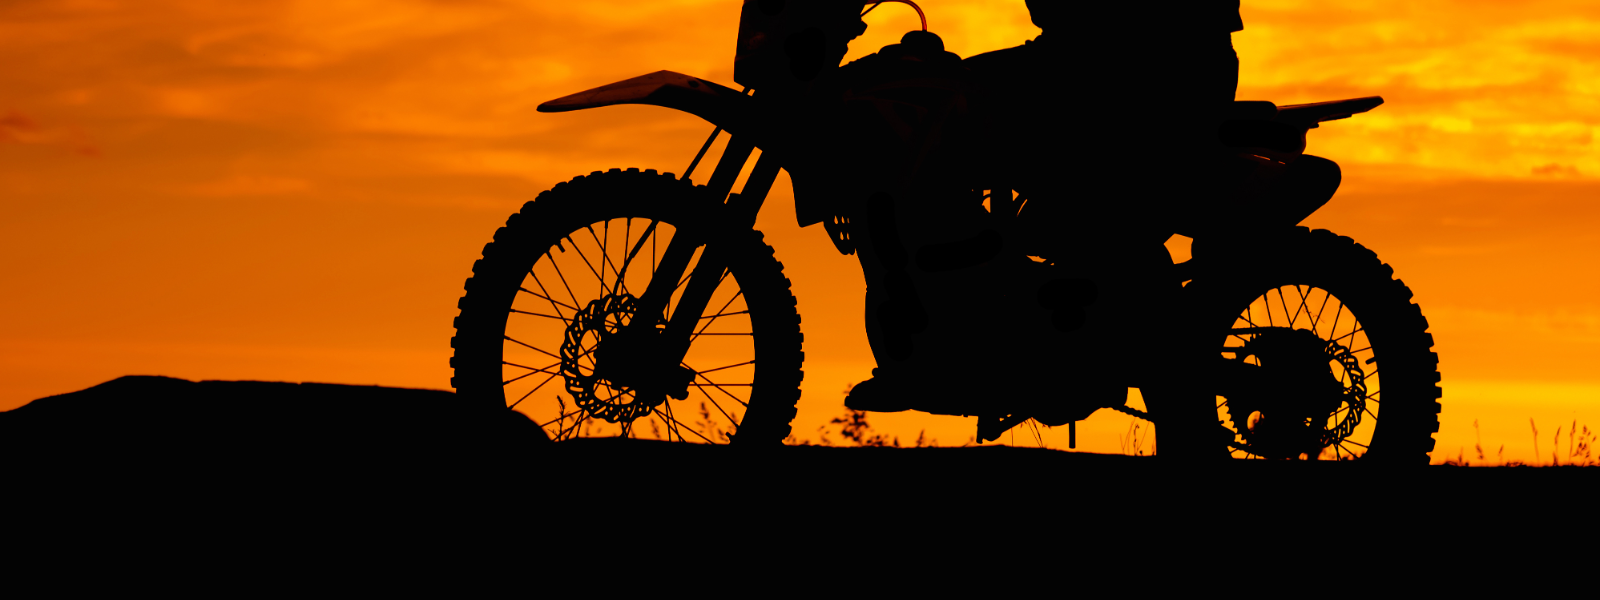 Sale, maintenance and repair of motorcycles and related parts and accessories in Kastre vald